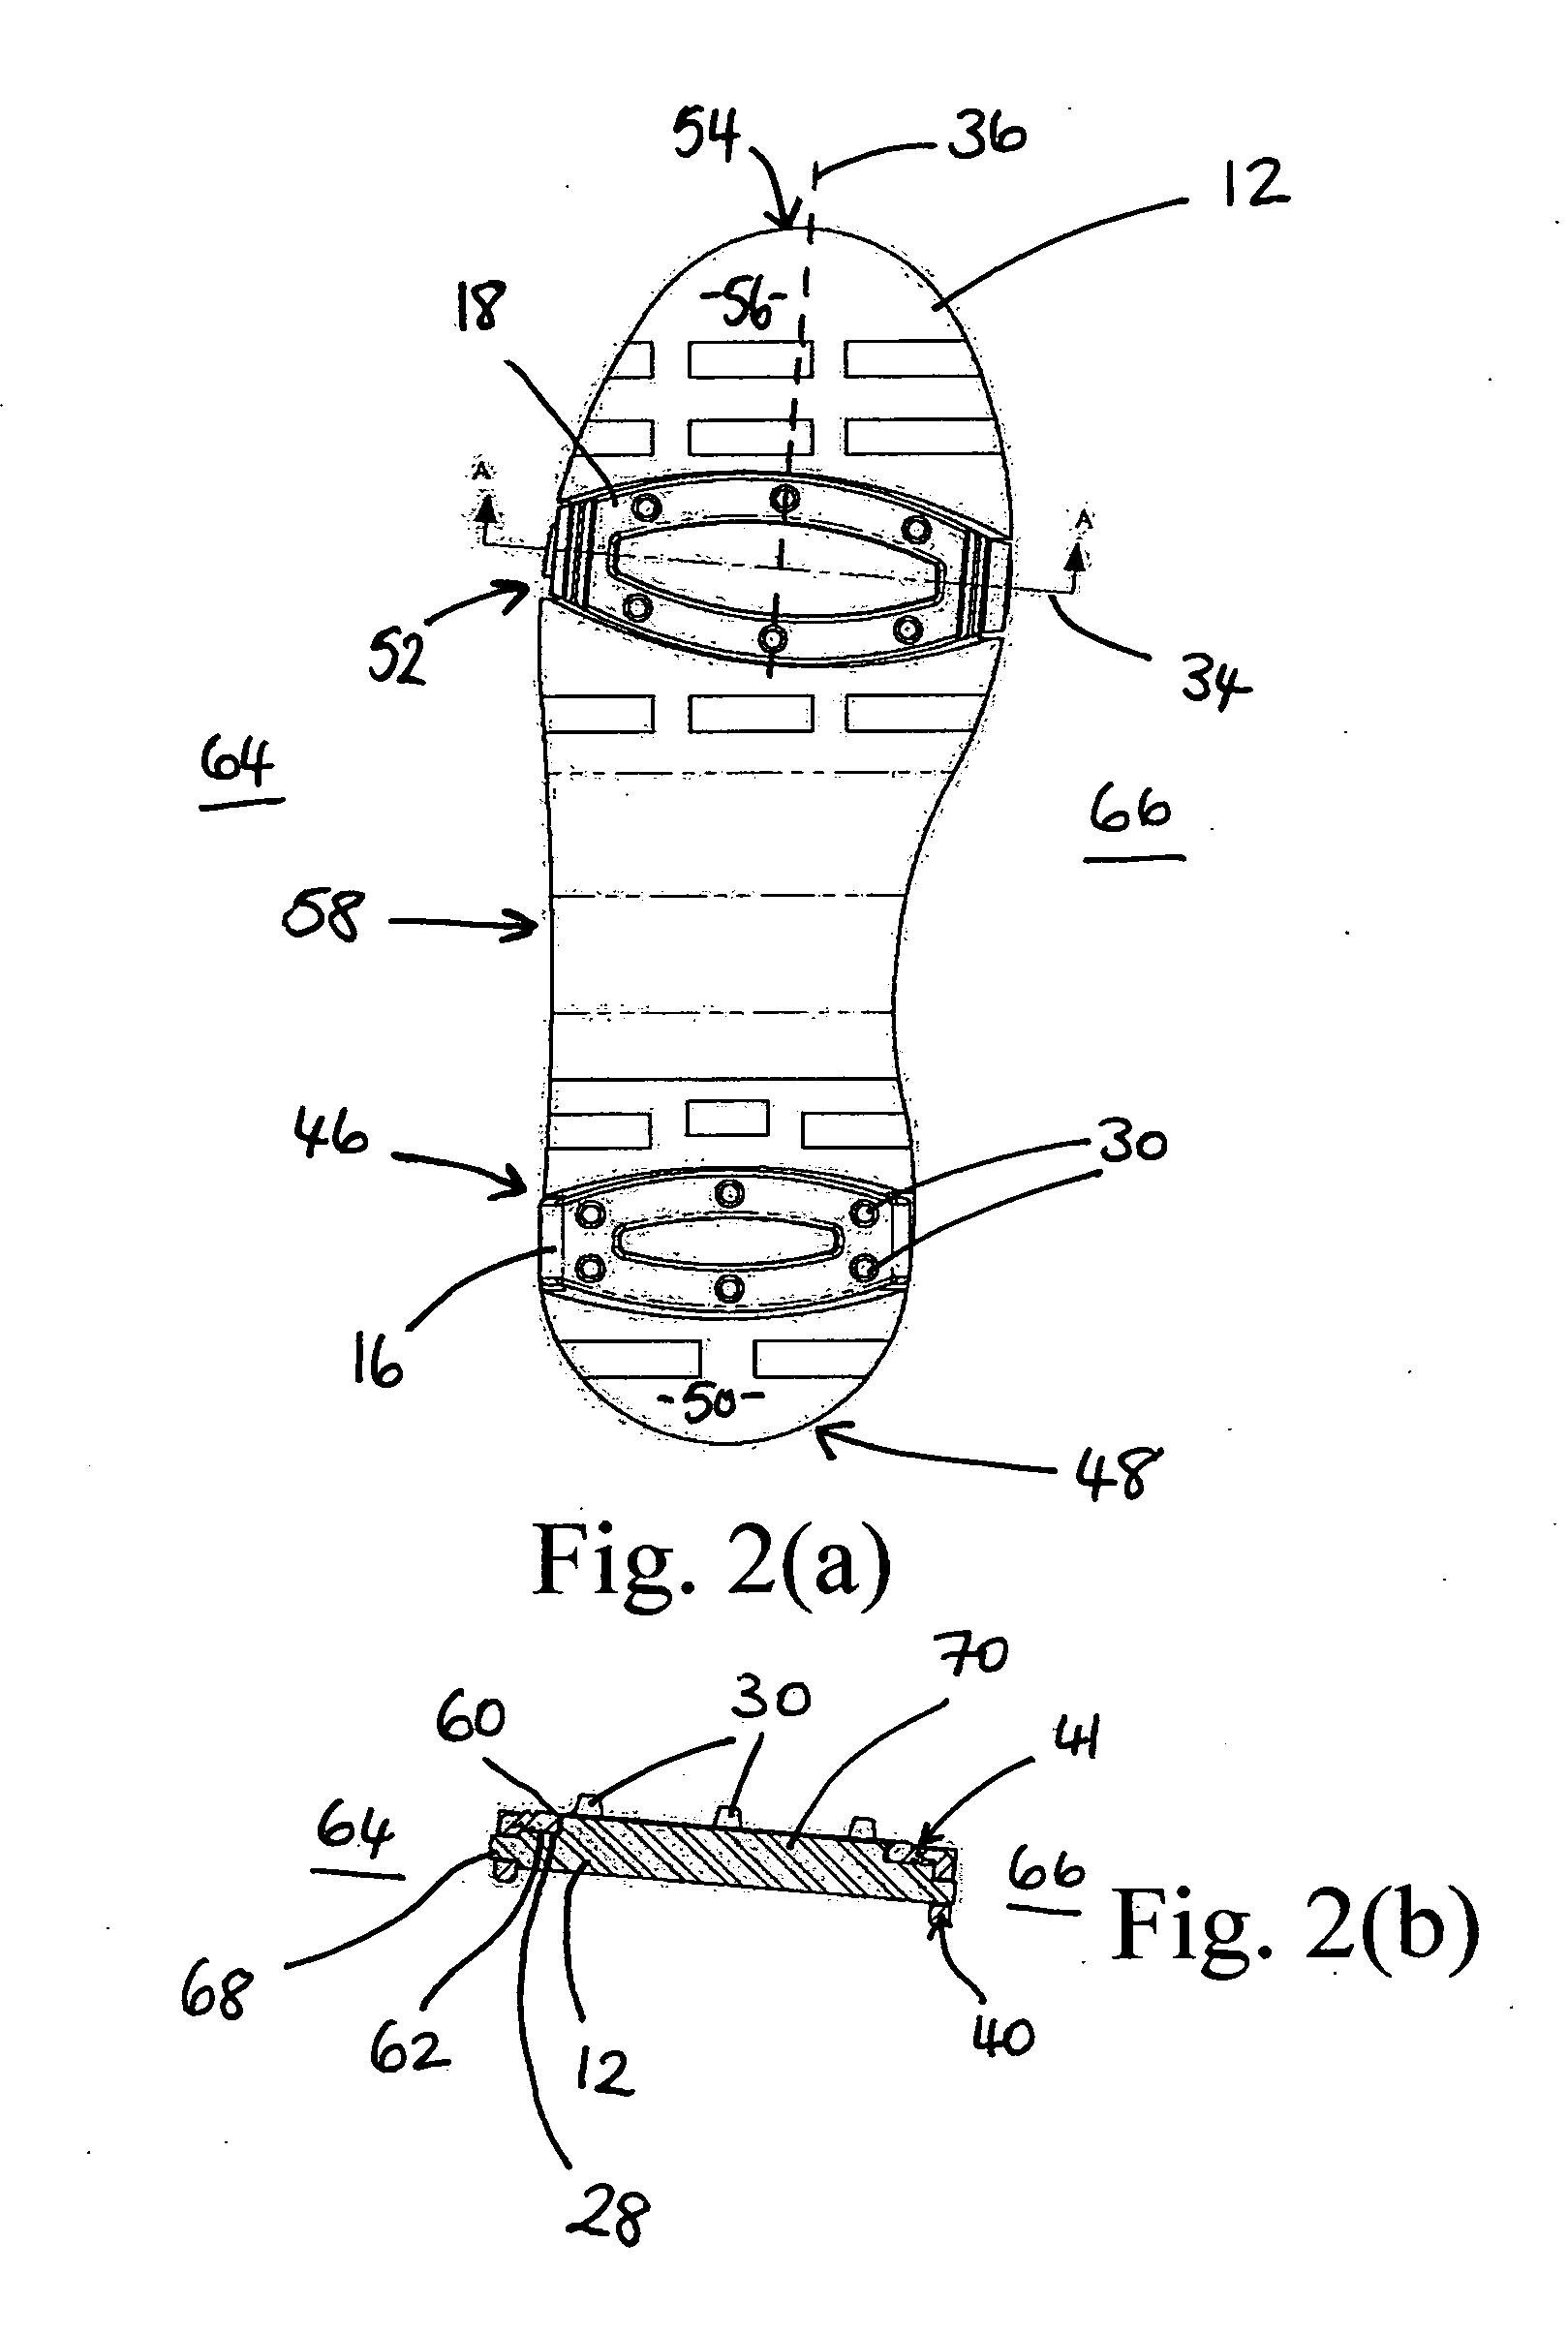 Attachments for an item of footwear